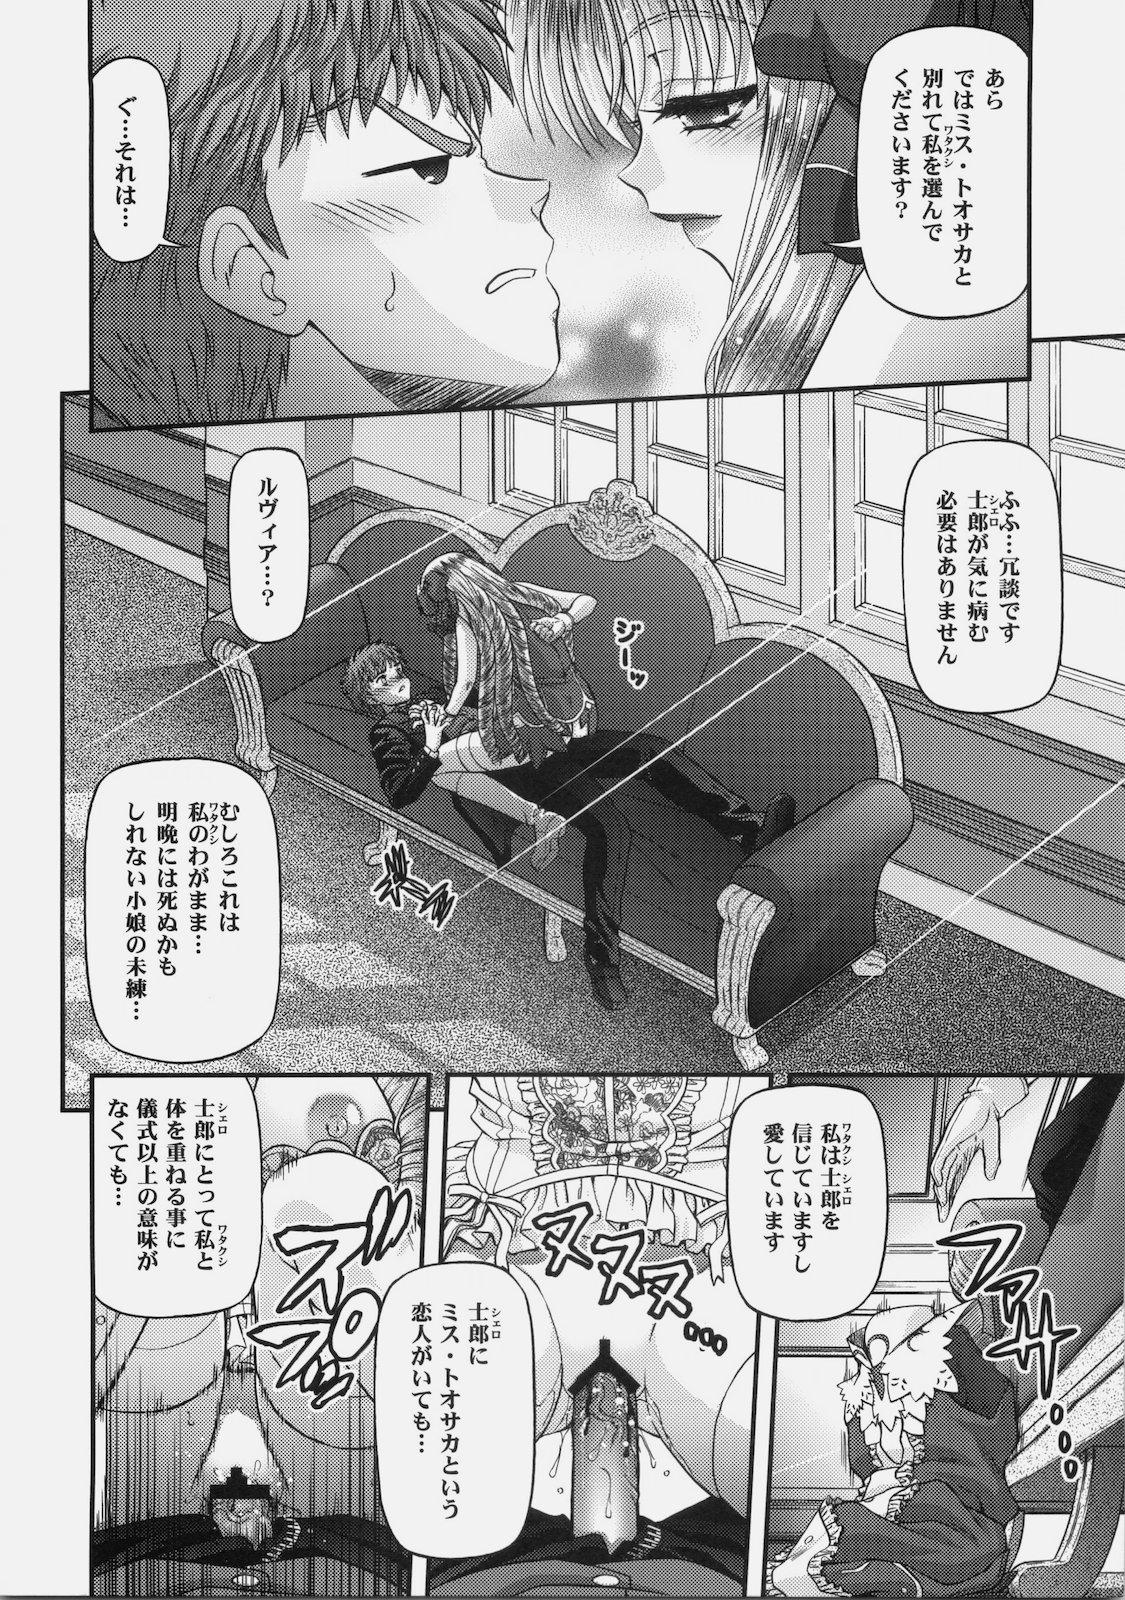 Shaking BLUE BLOOD'S vol.26 - Fate hollow ataraxia Girlfriend - Page 10